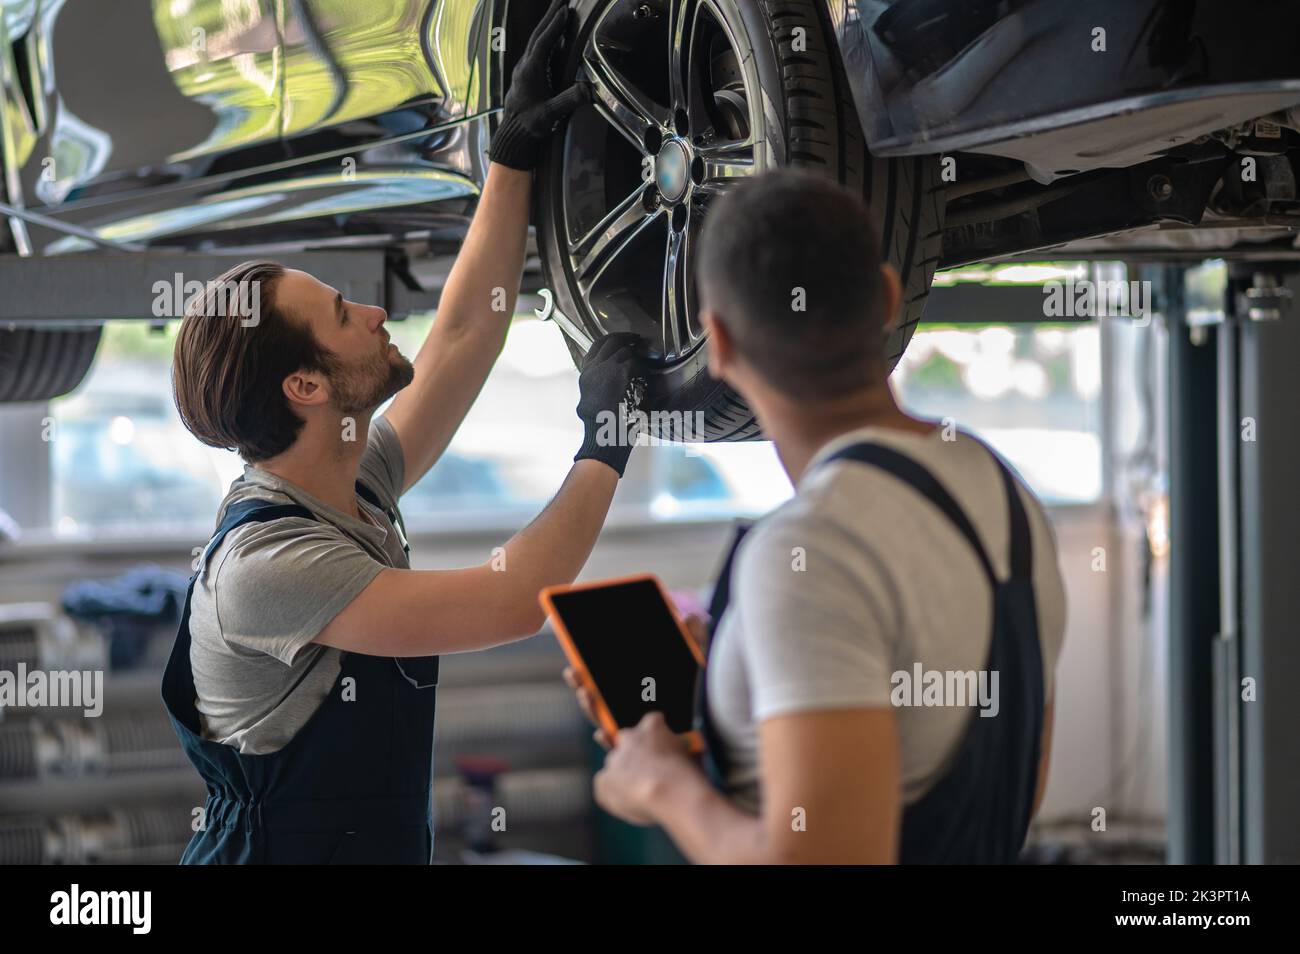 Two car repair shop workers fixing the client vehicle Stock Photo